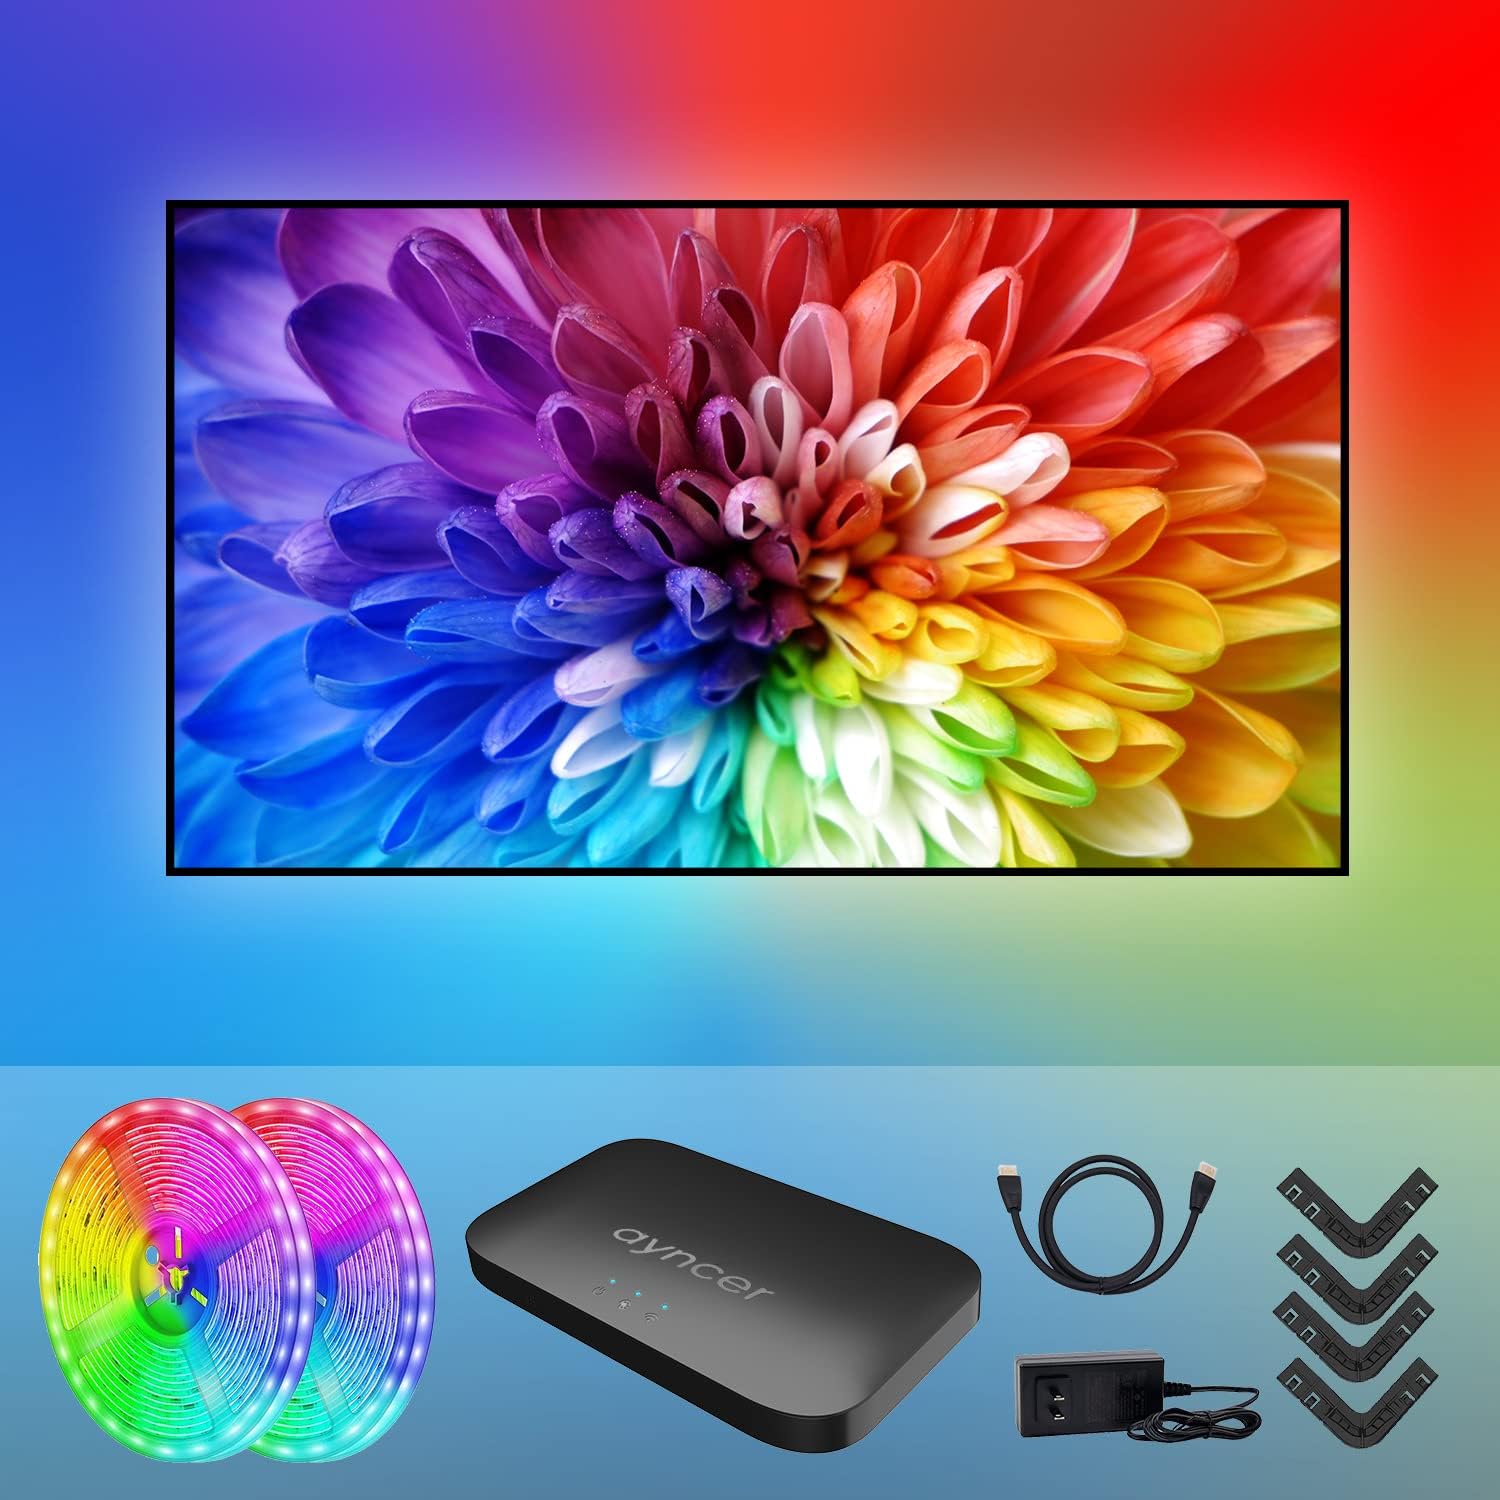 APEX HDMI Sync TV Backlight for All TV Sizes (Upto 90 inches) at